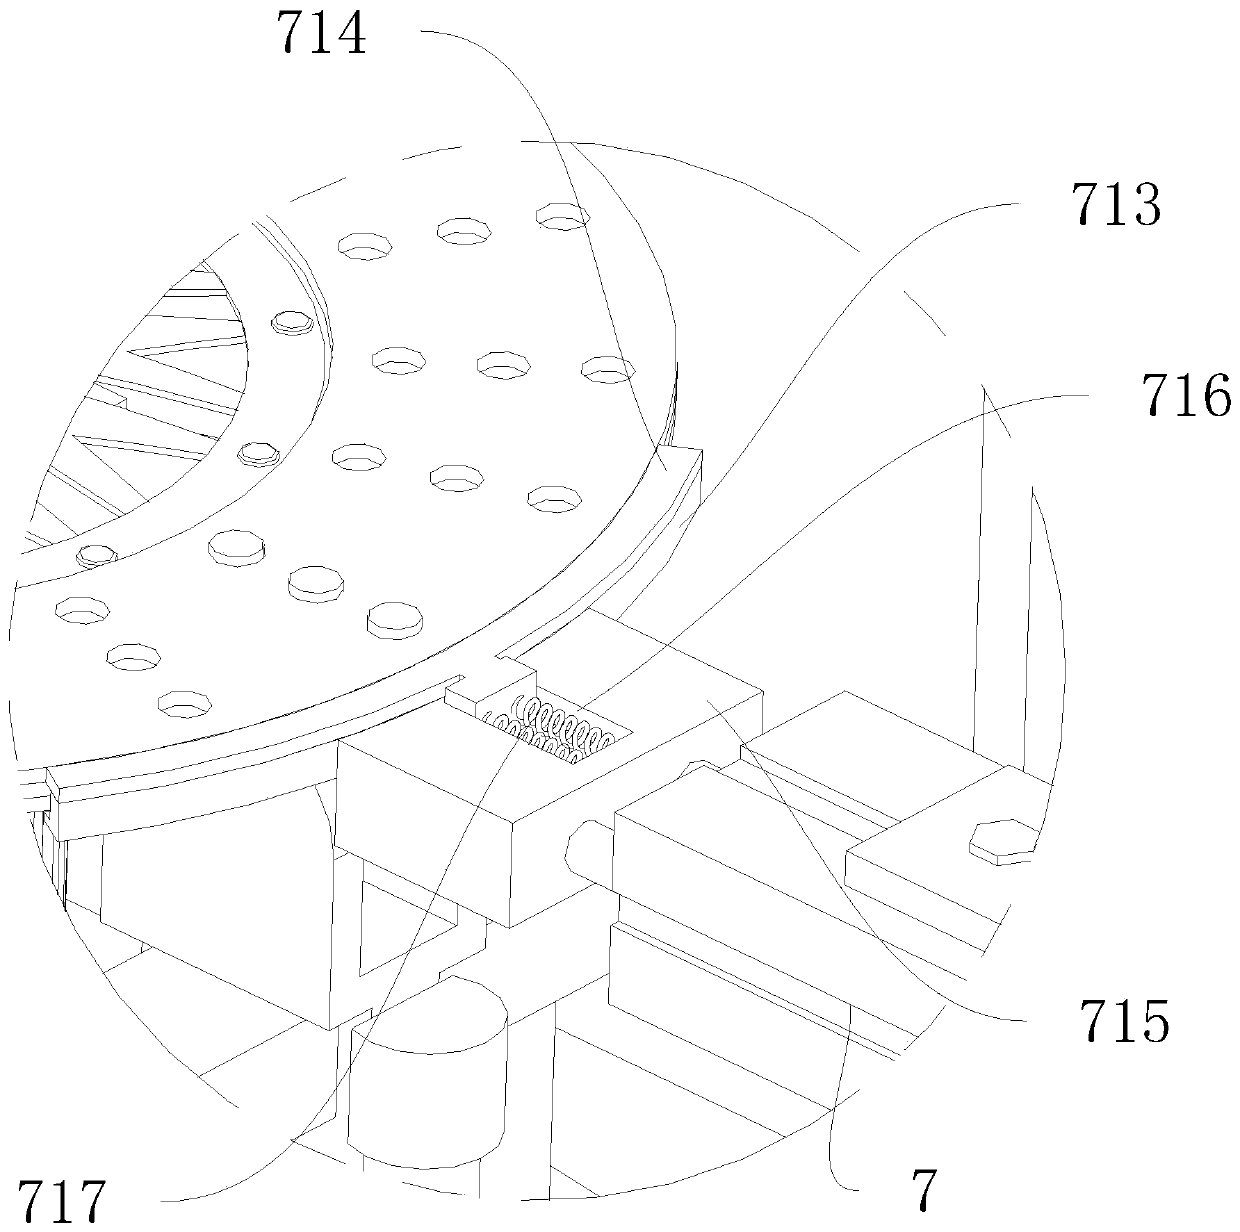 Clutch riveting auxiliary device